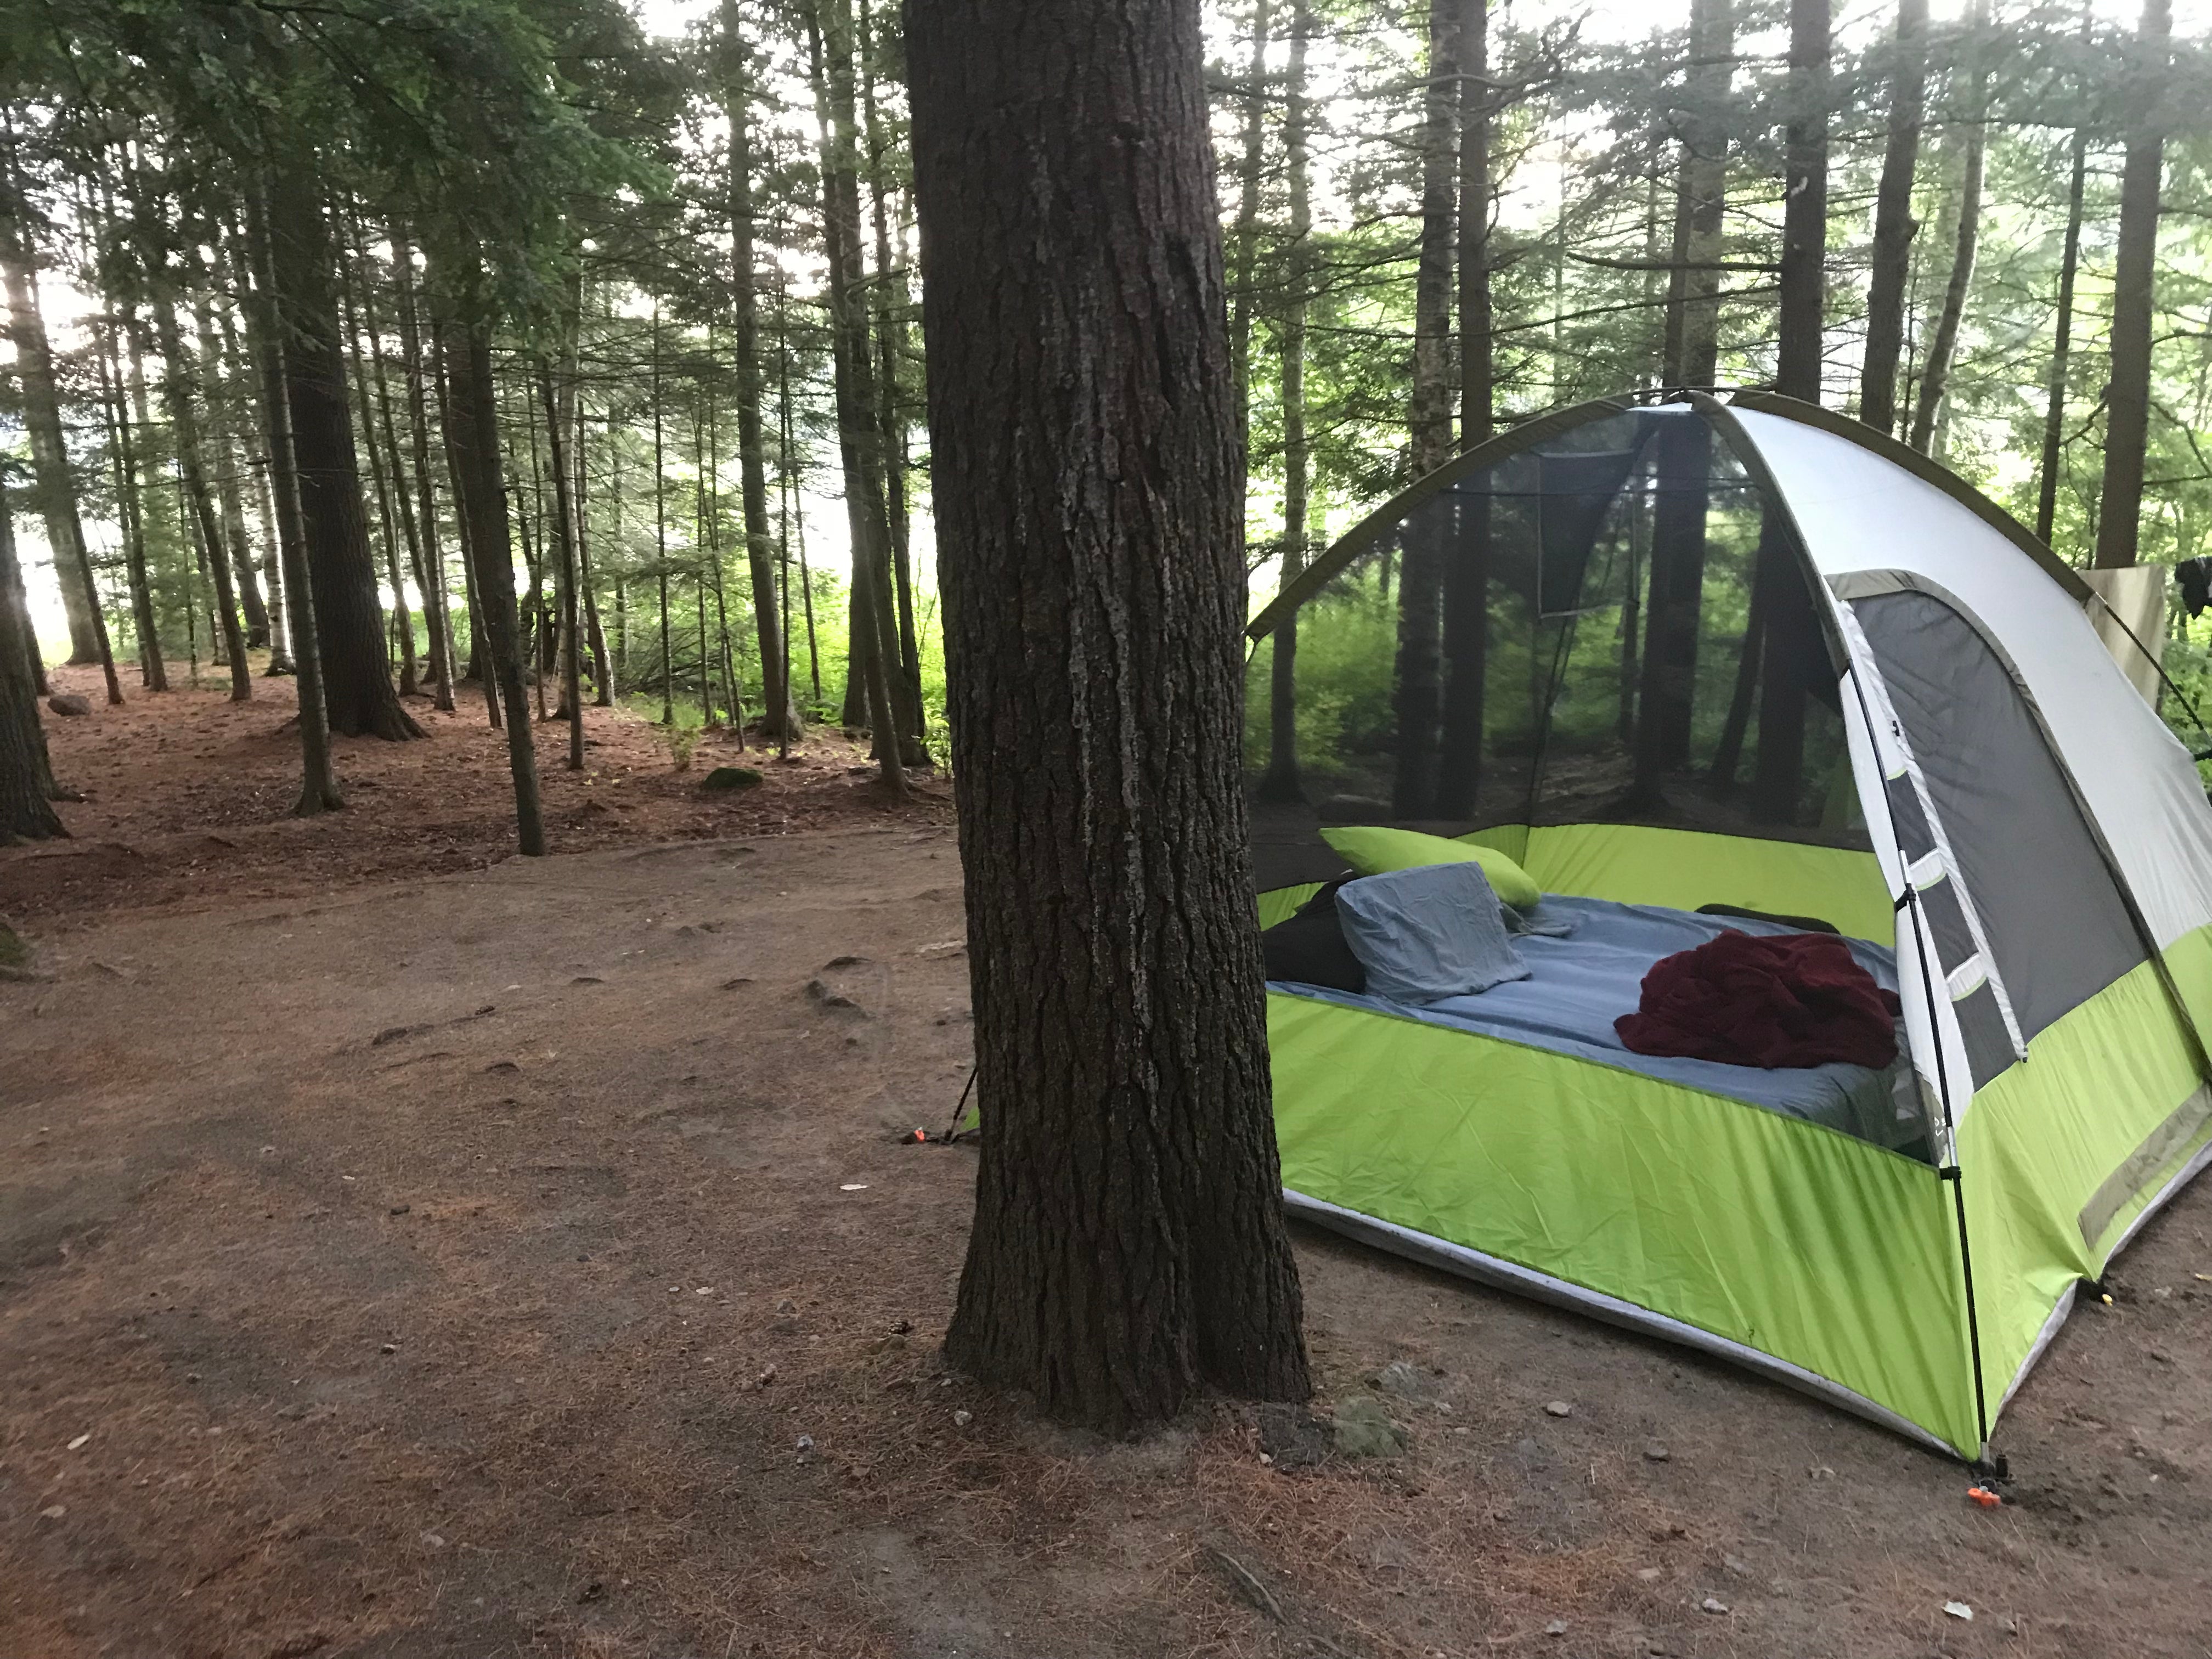 Camper submitted image from Putnam Pond Adirondack Preserve - 5